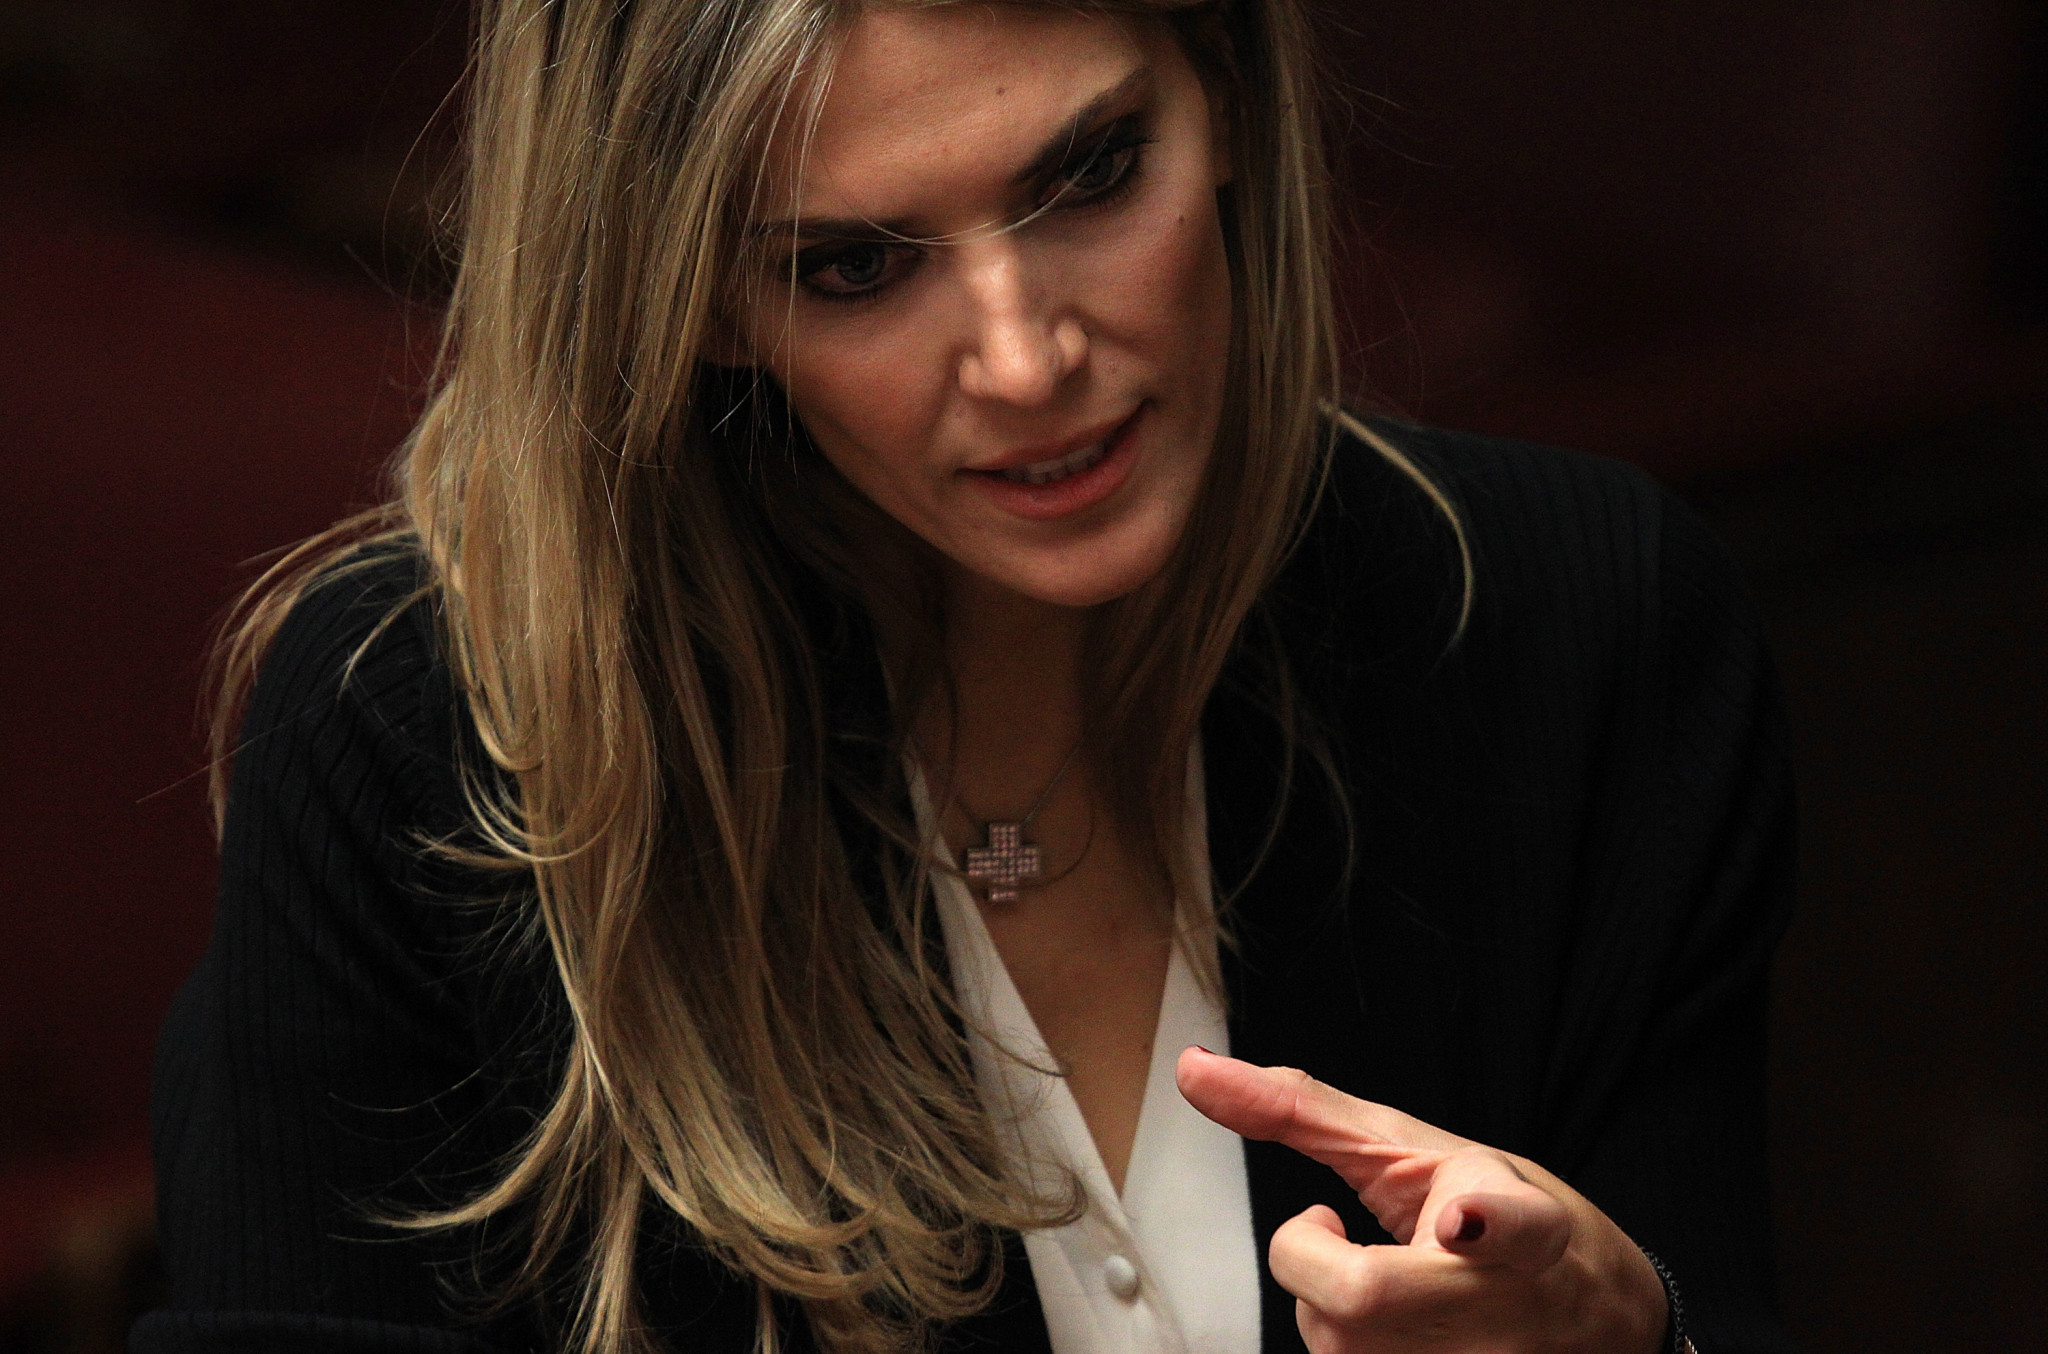 Greek politician Eva Kaili has been arrested as part of the corruption inquiry ©Getty Images